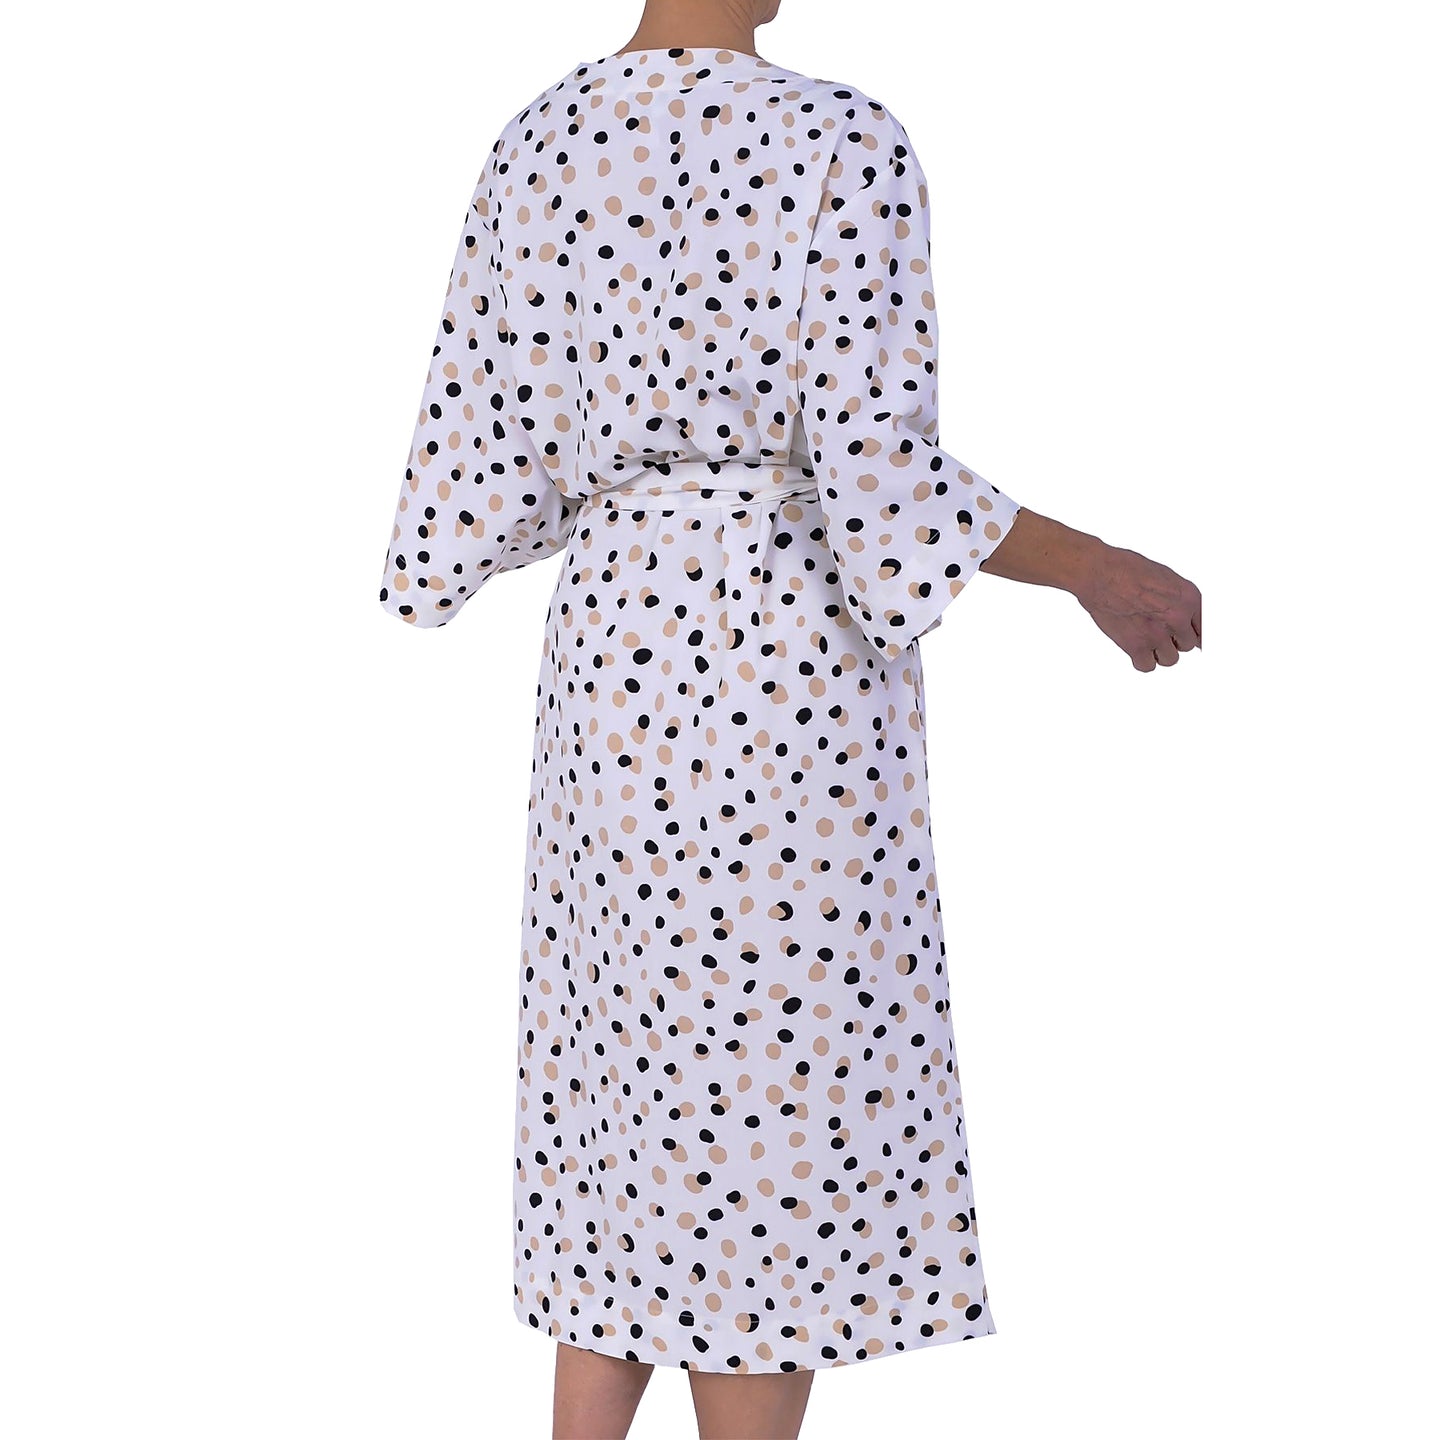 Lily's Robes - White Ground with Dots Mystique Intimates